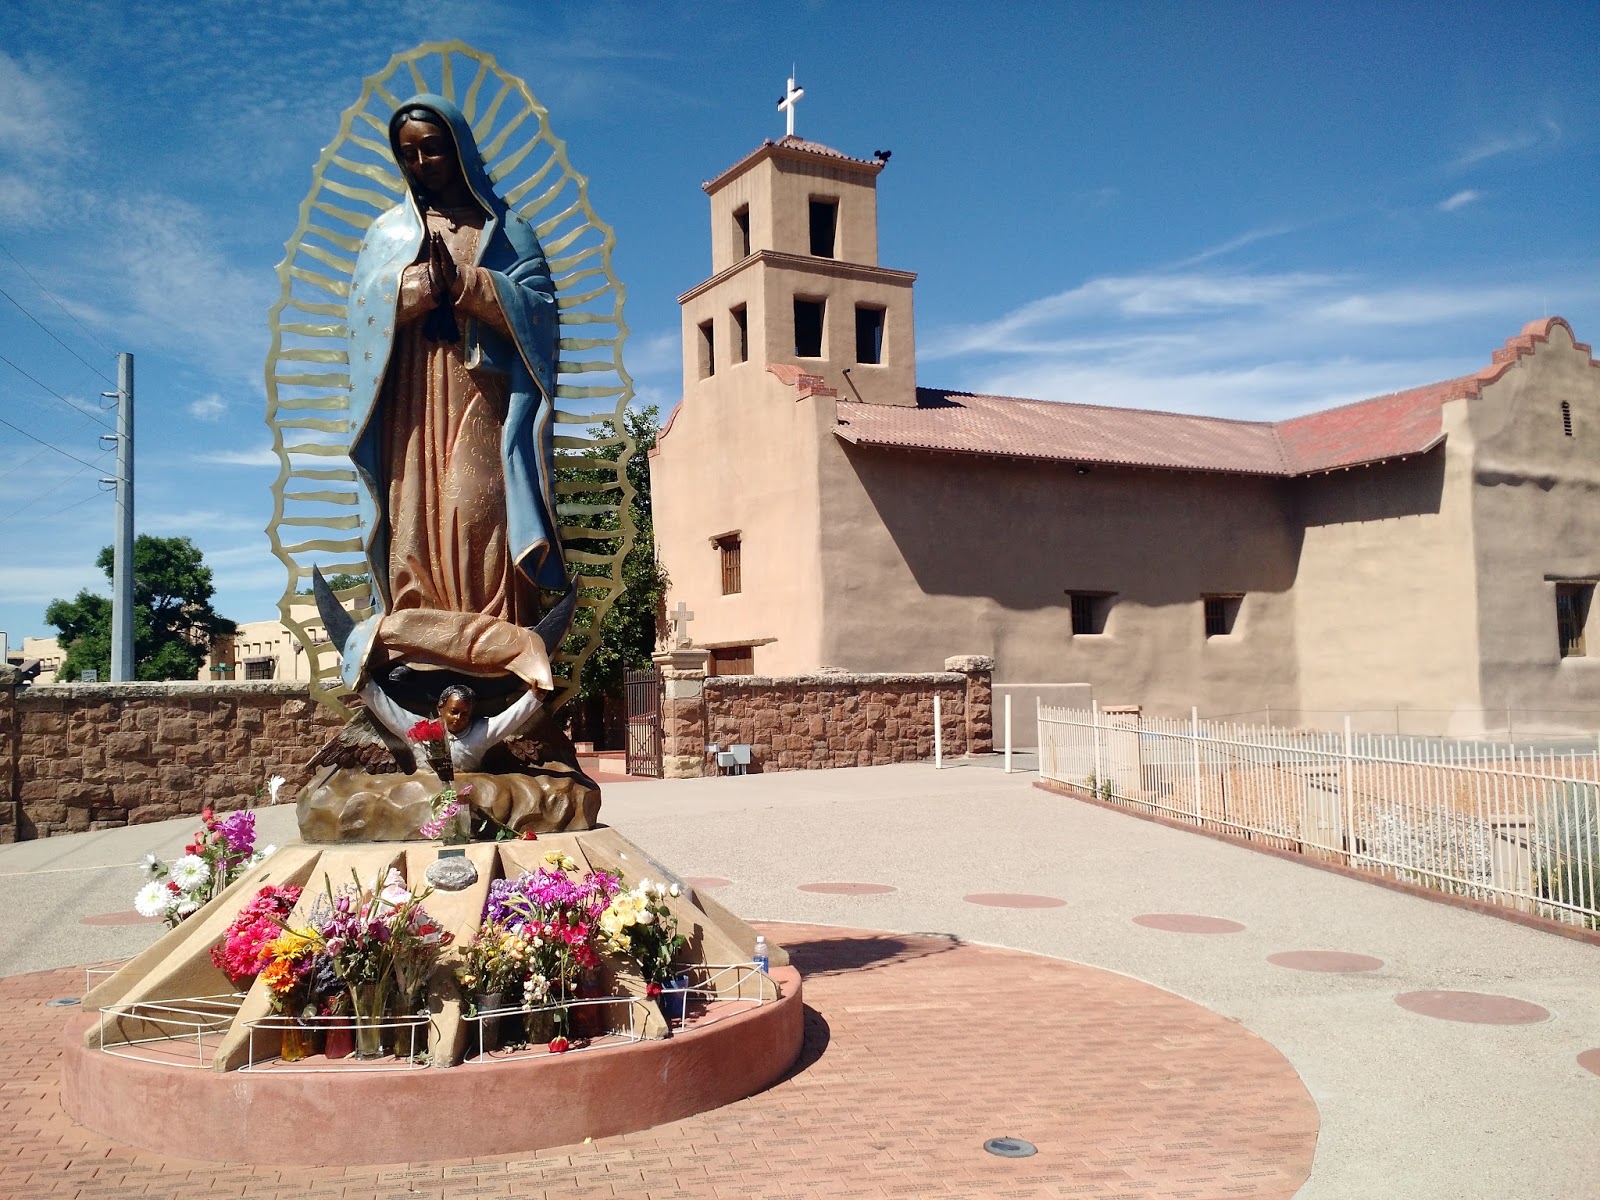 Robert Waltman: Guadalupe and other stuff